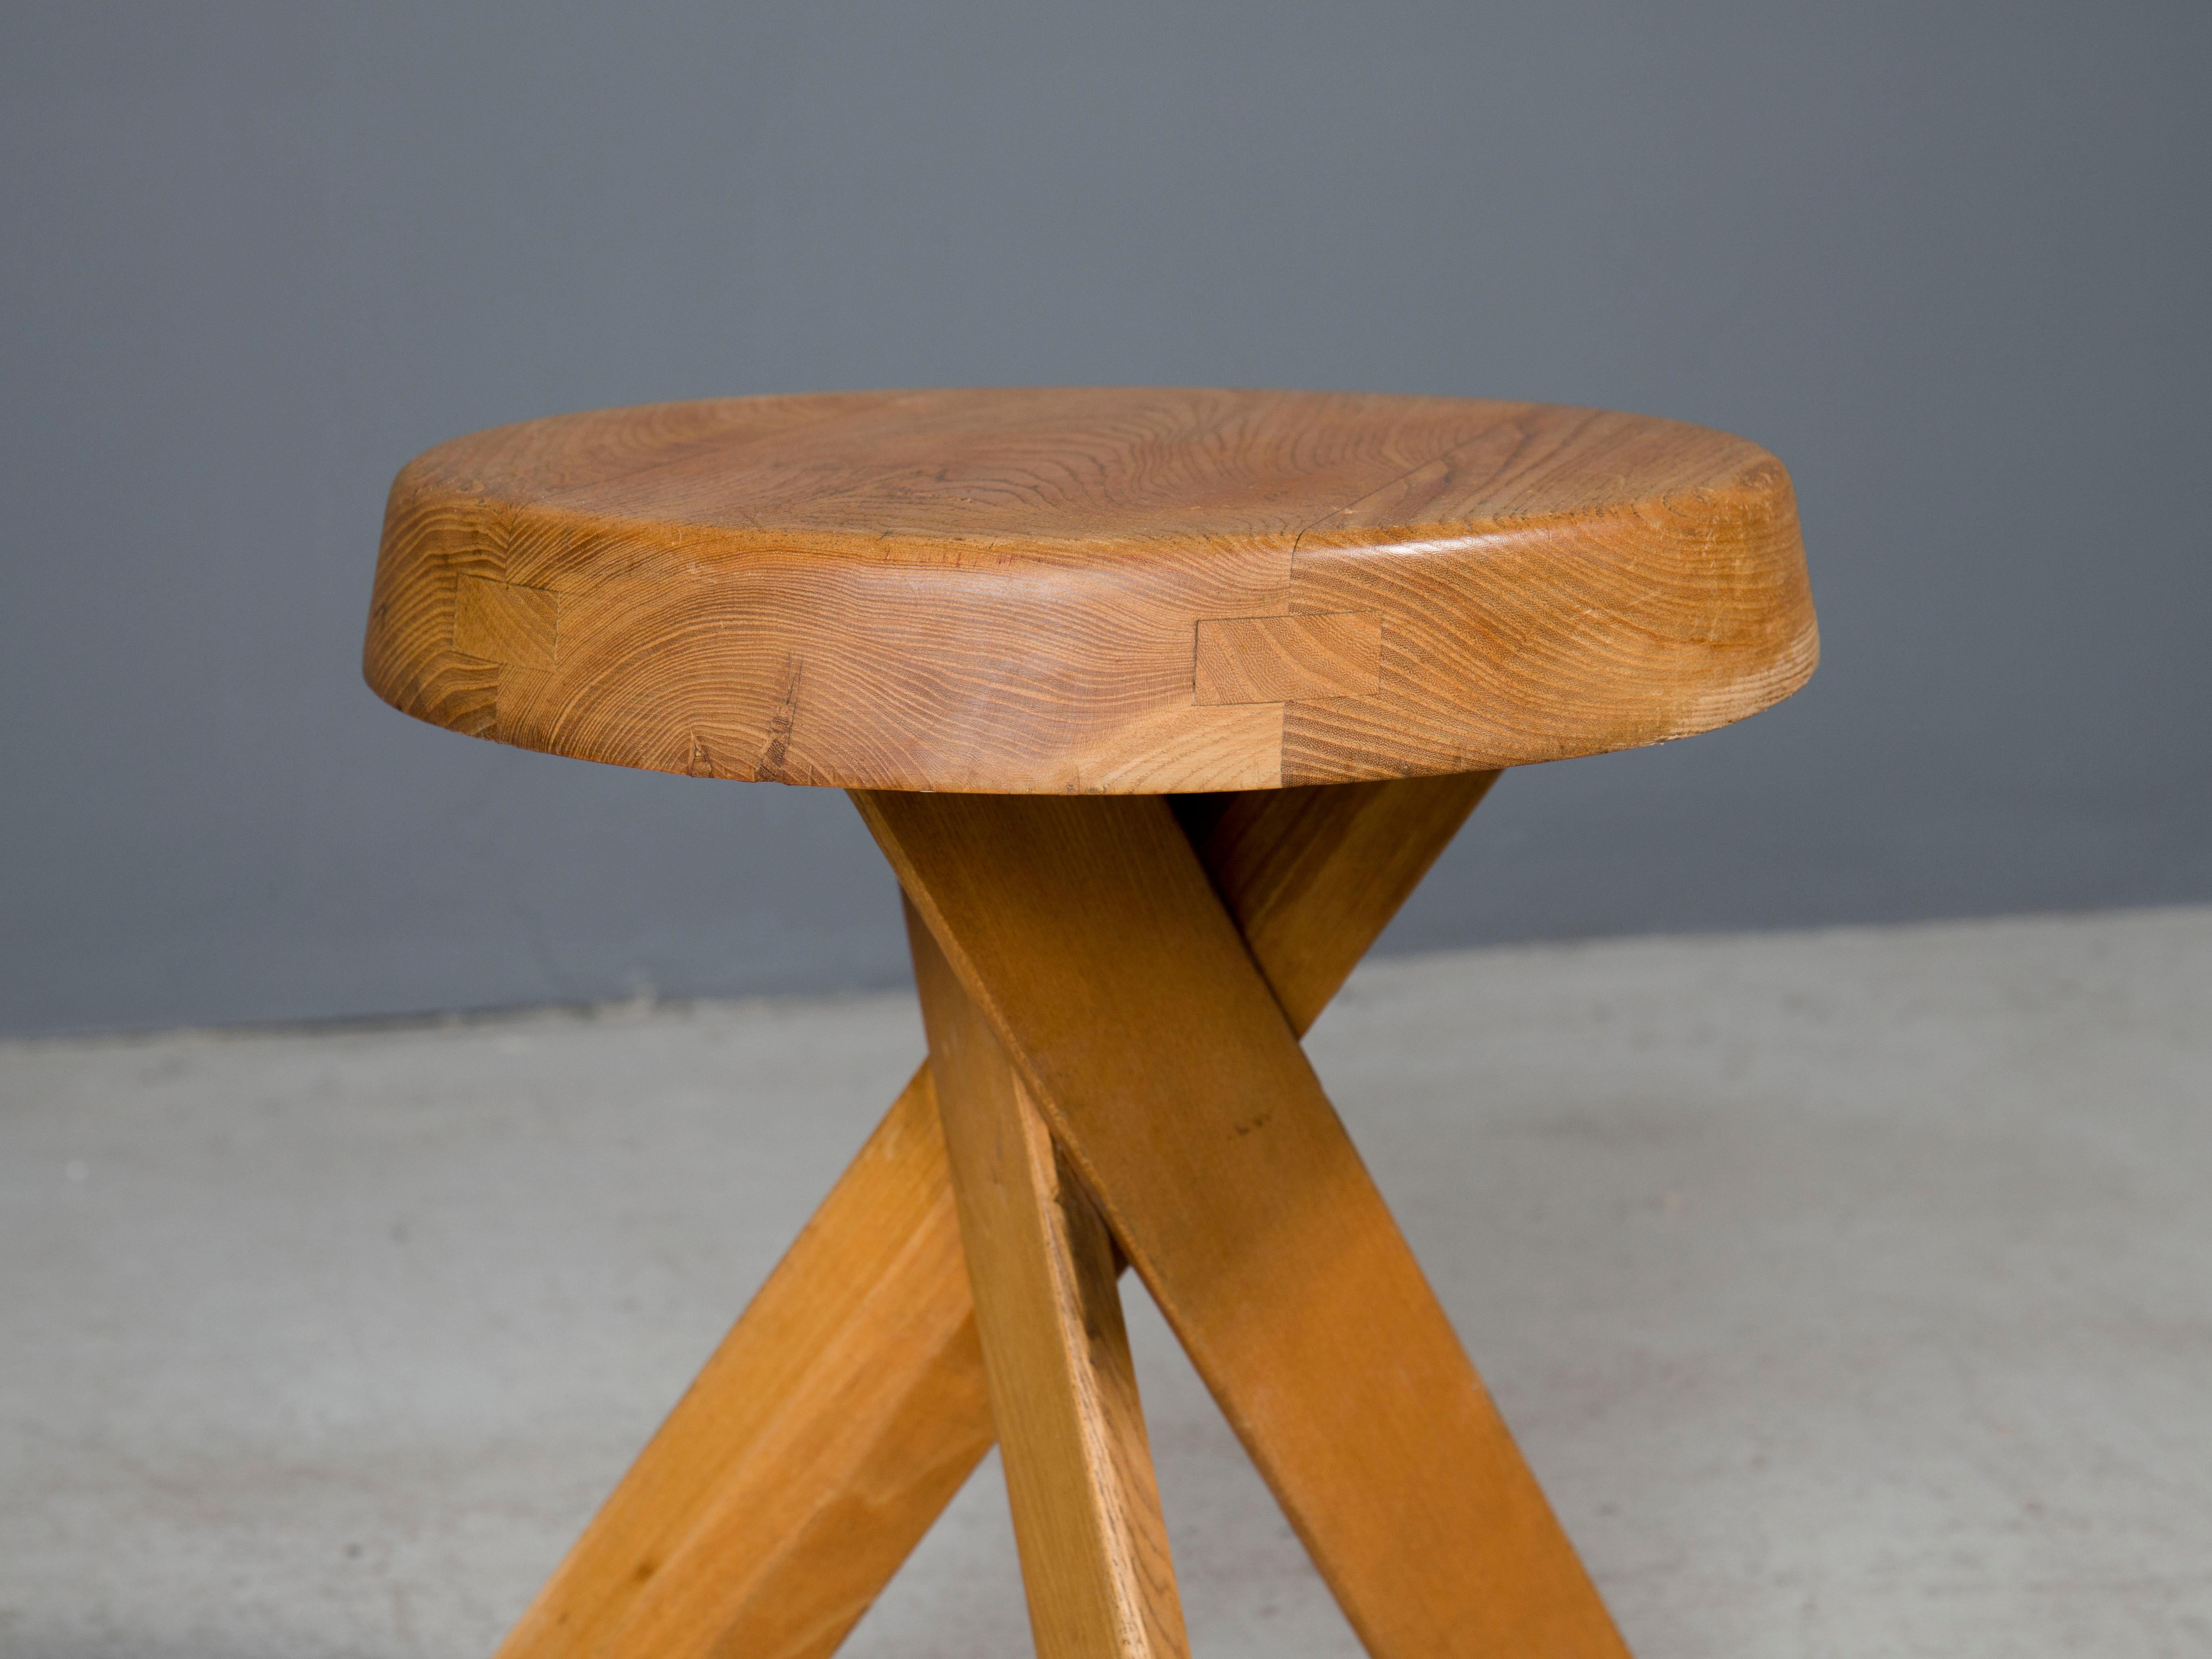 Vintage Pierre Chapo Stool in, now extinct, French Elm S31 with excellent patina. Excellent form and quality of craftsmanship.